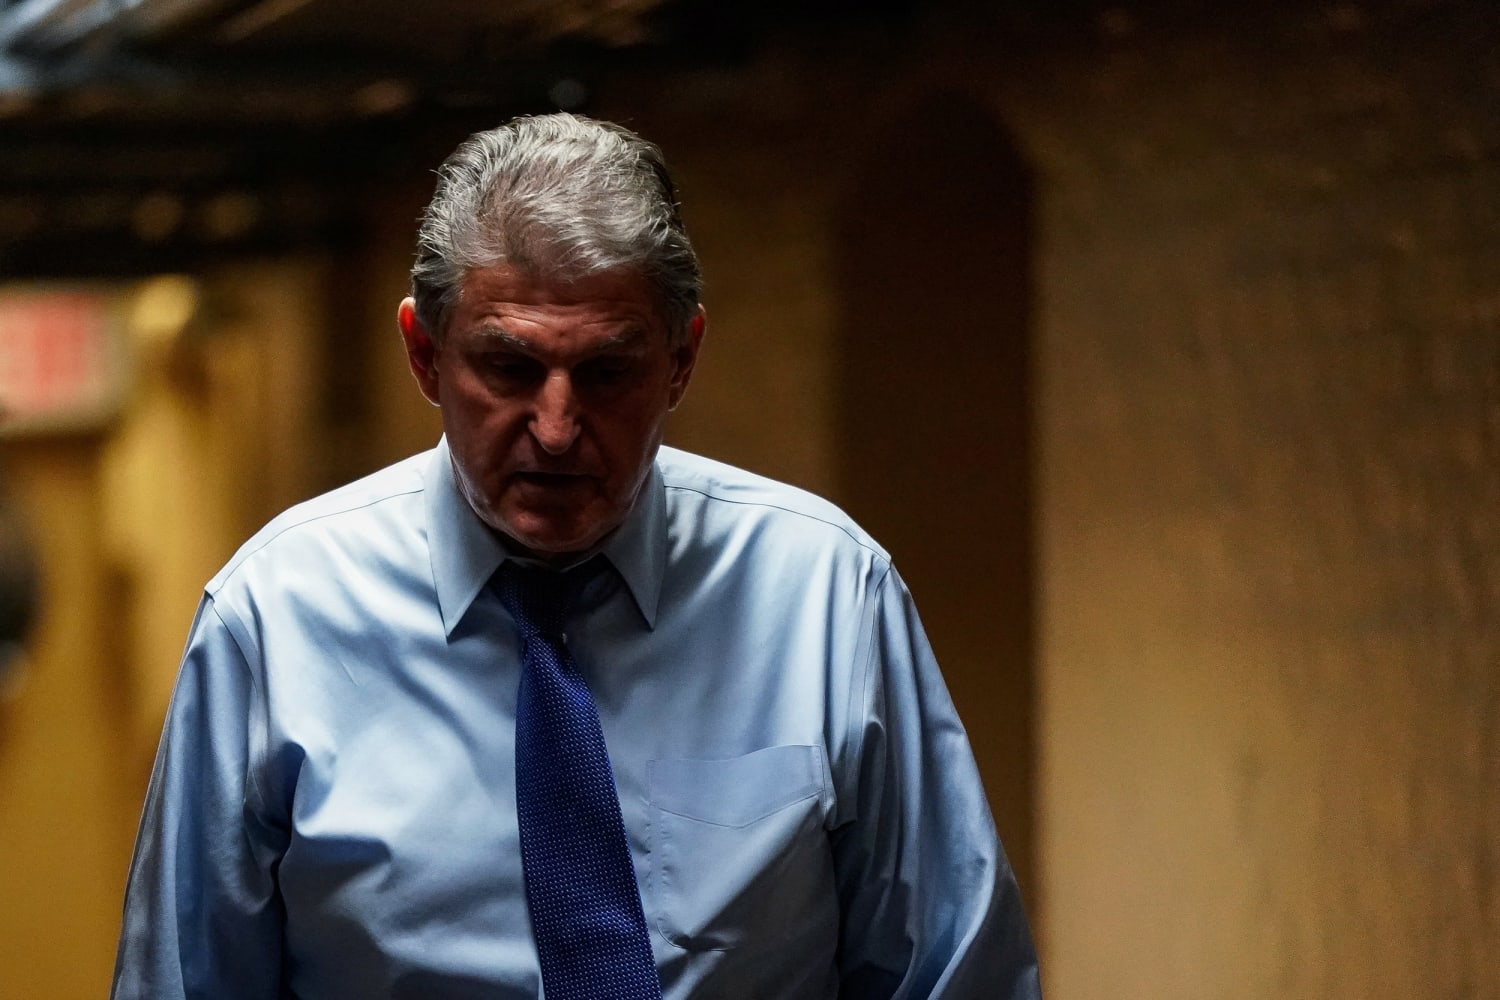 GOP-aligned ‘dark money’ group launches $1M ad campaign to pressure Manchin